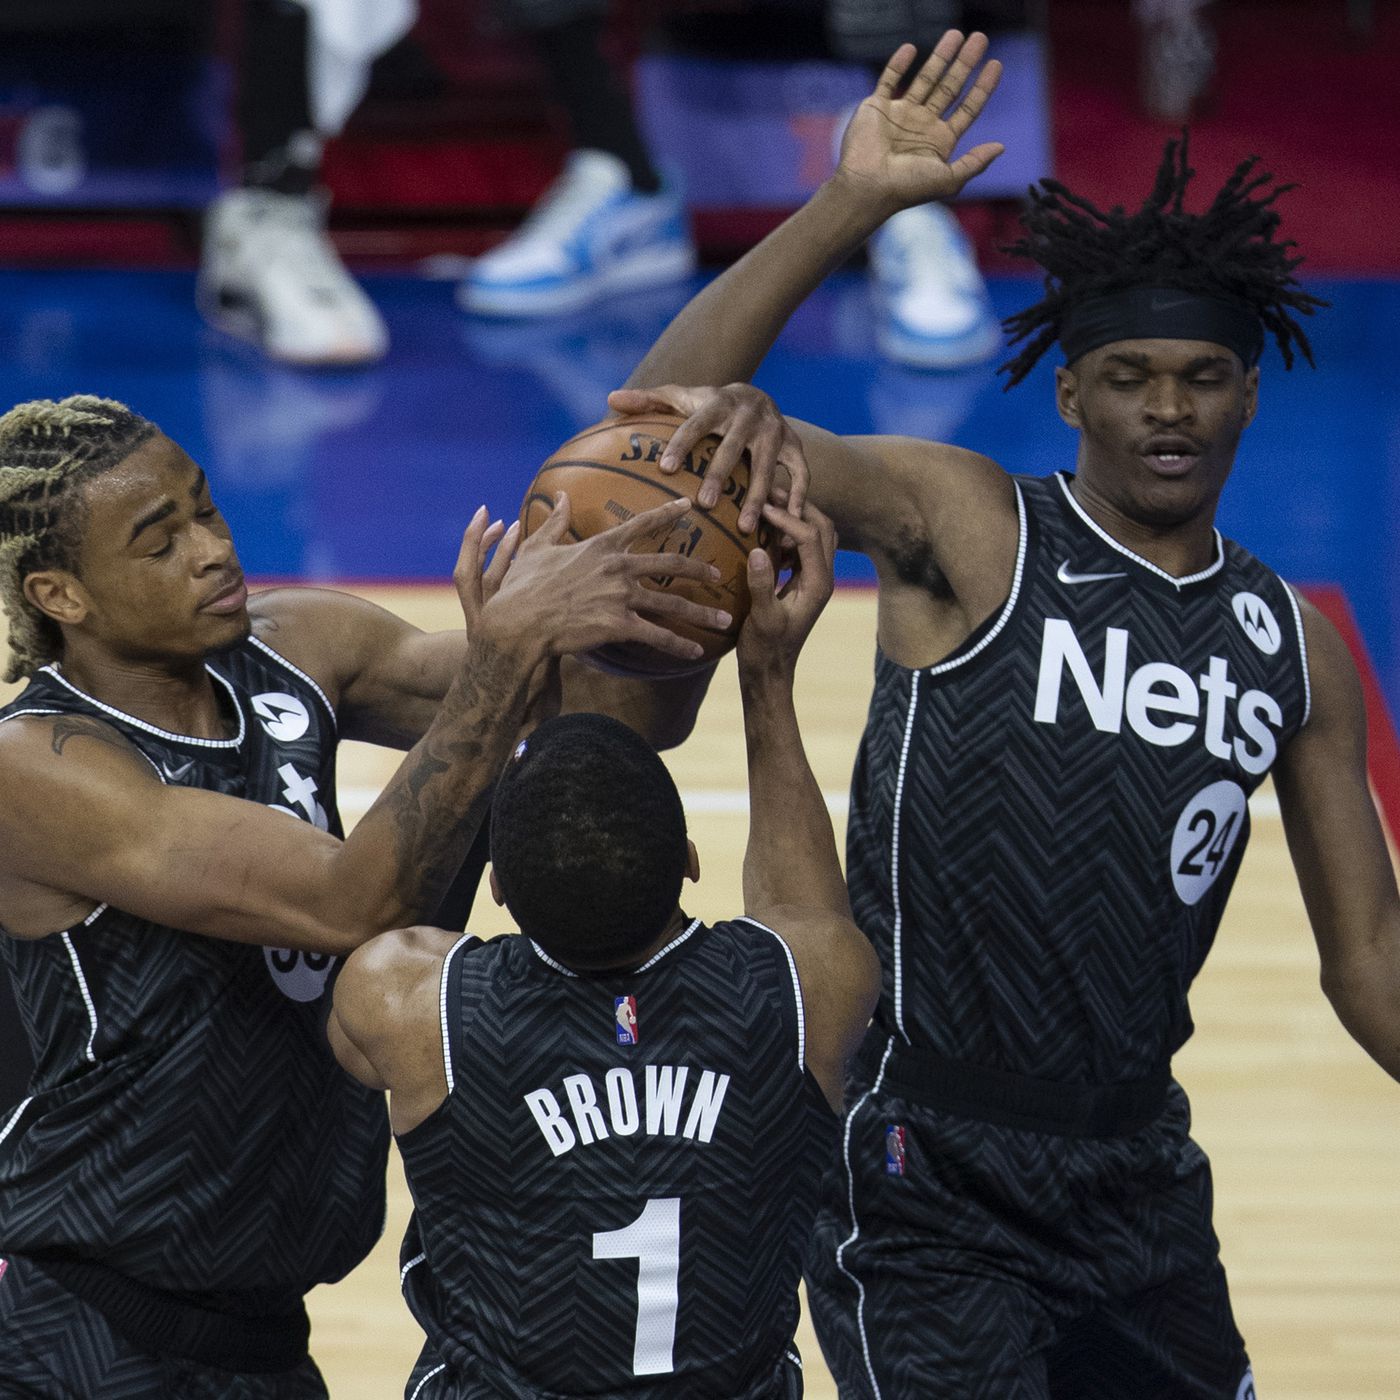 No Easy Buckets' Could Be The Theme Of The 2021 2022 Nets